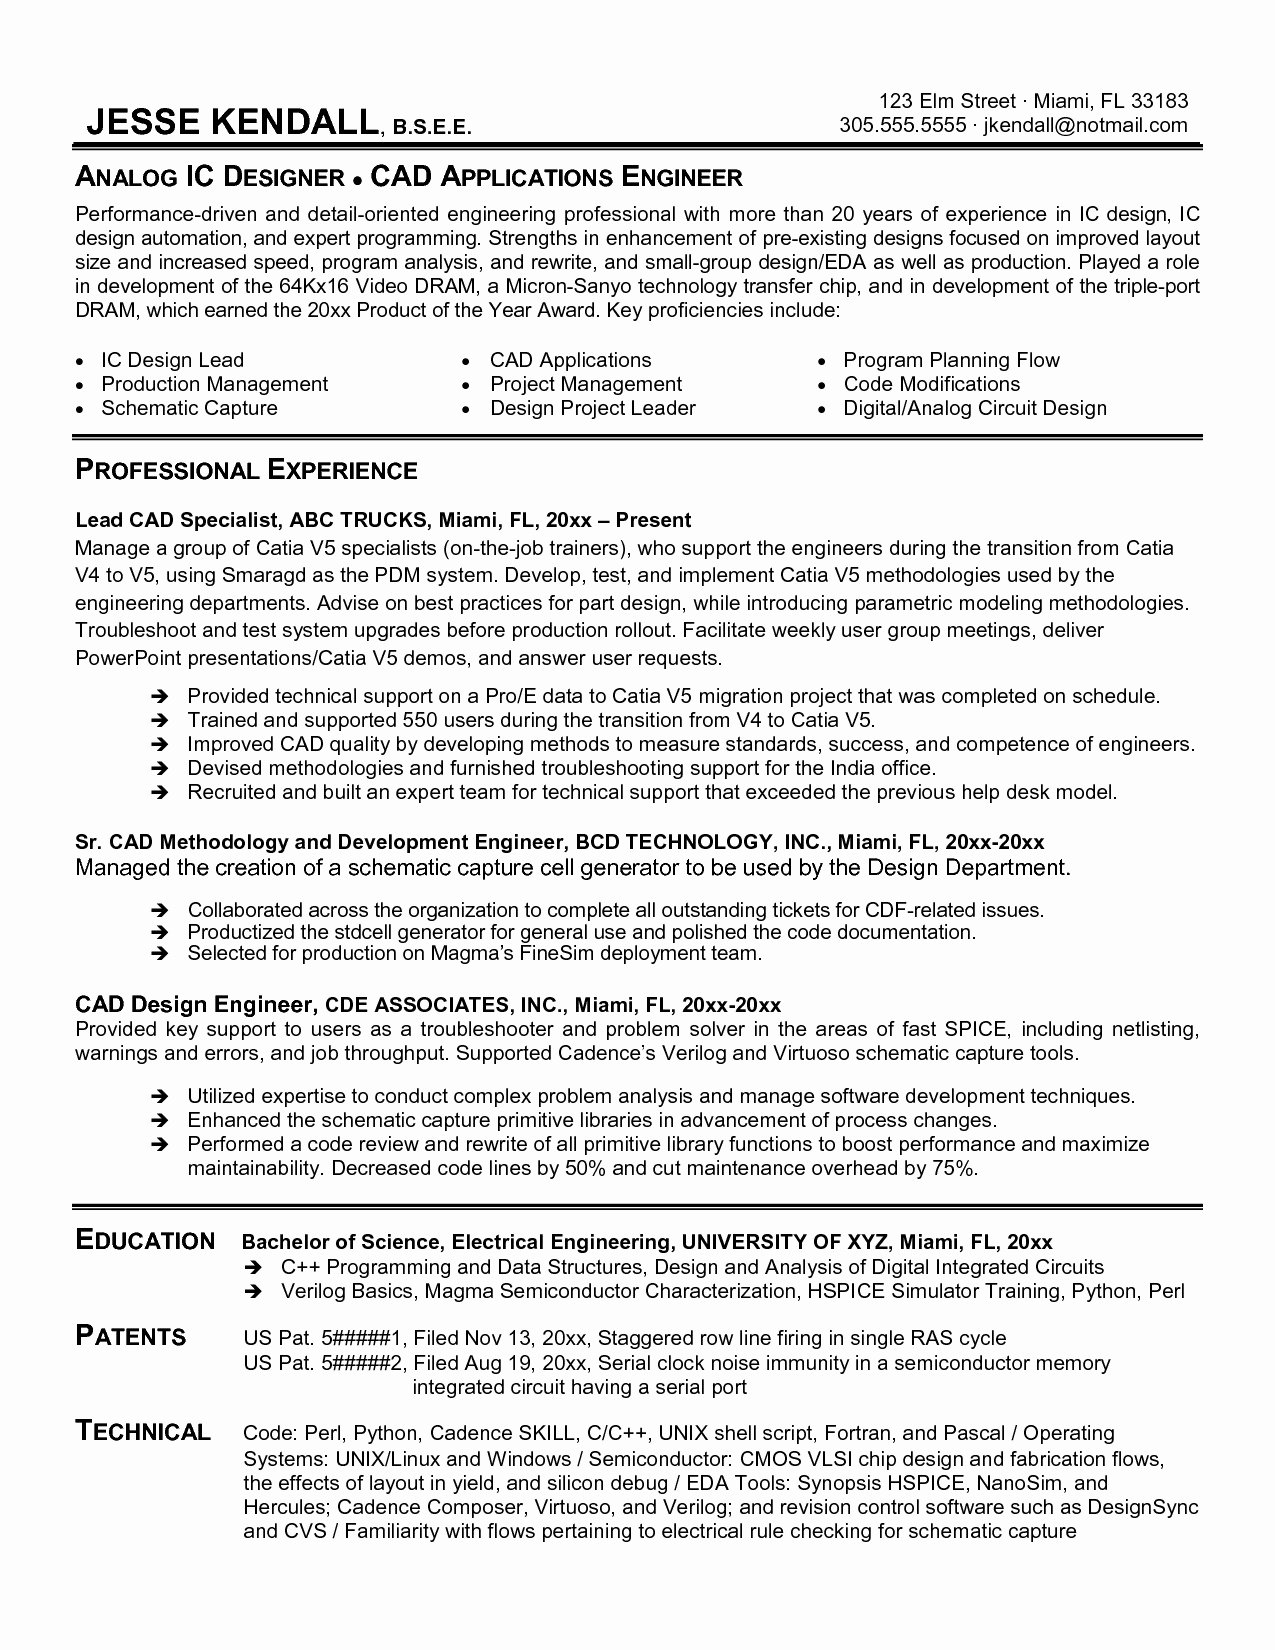 Resume Examples Engineer Resume Examples Templates